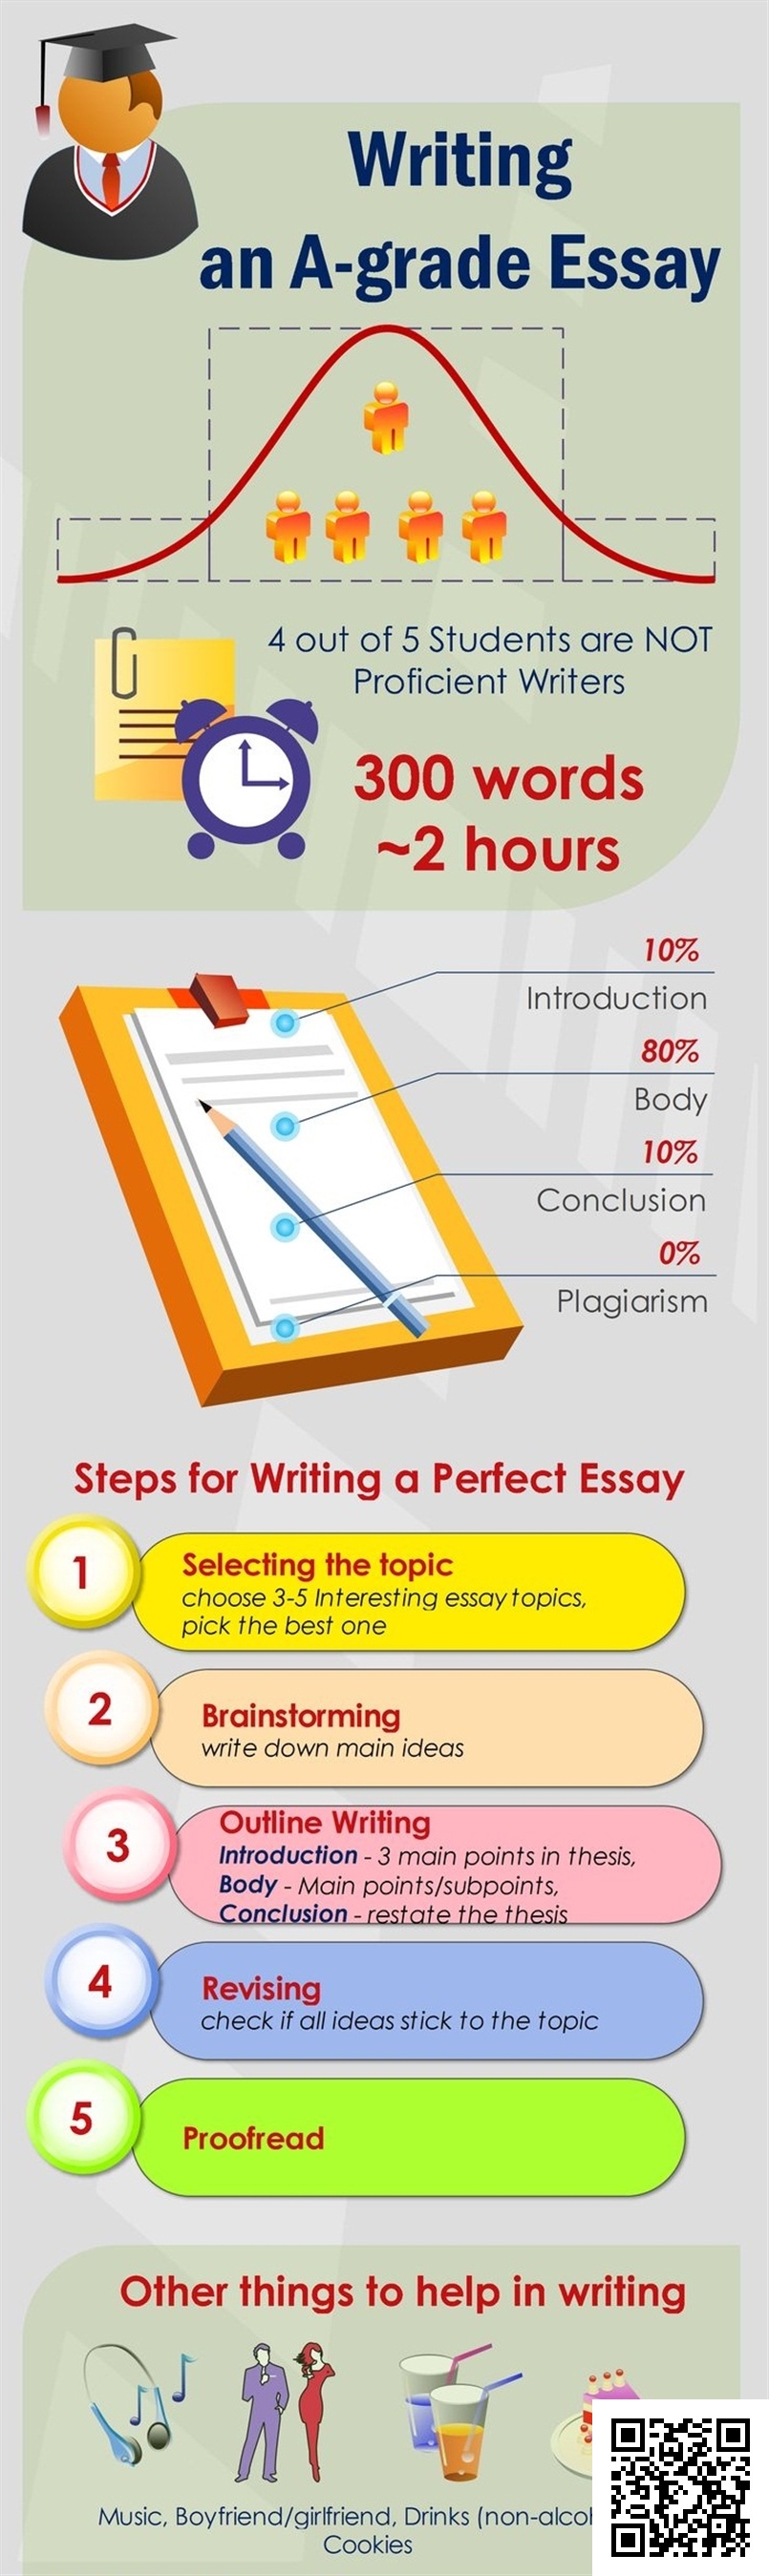 Tips For A+ Essay Writing Skill! | Osem.me